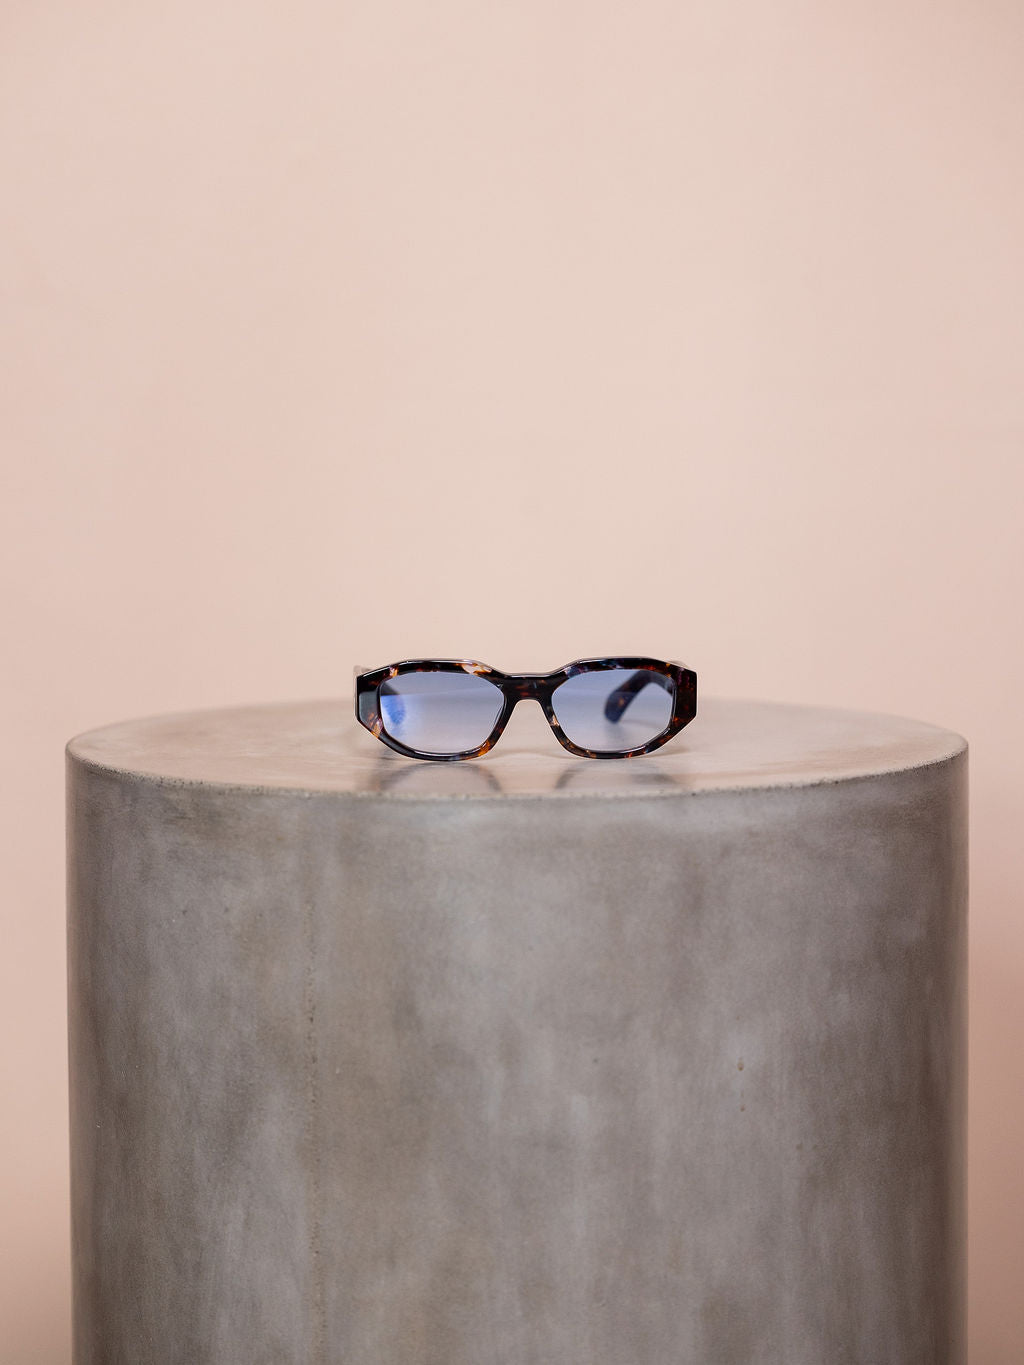 Patterned sunglasses on podium against pink background